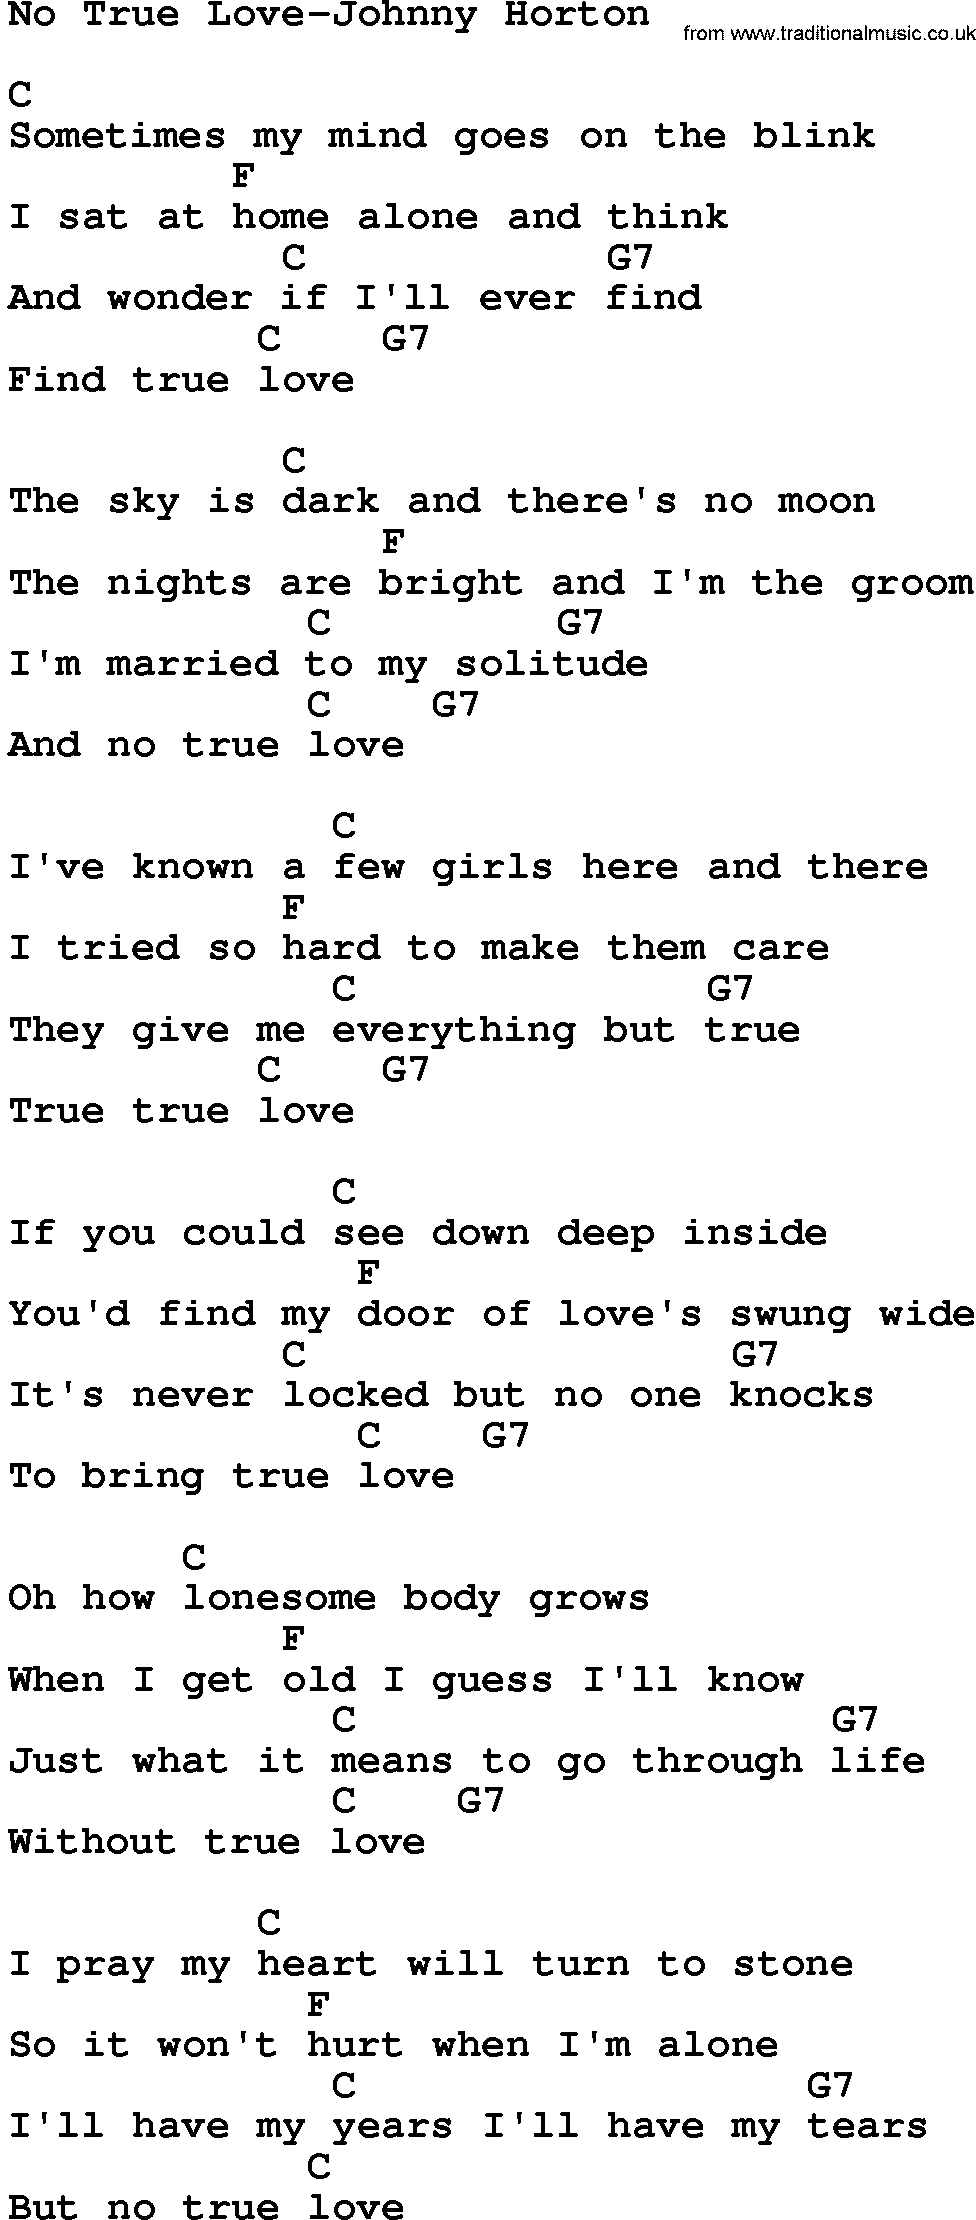 Country music song: No True Love-Johnny Horton lyrics and chords